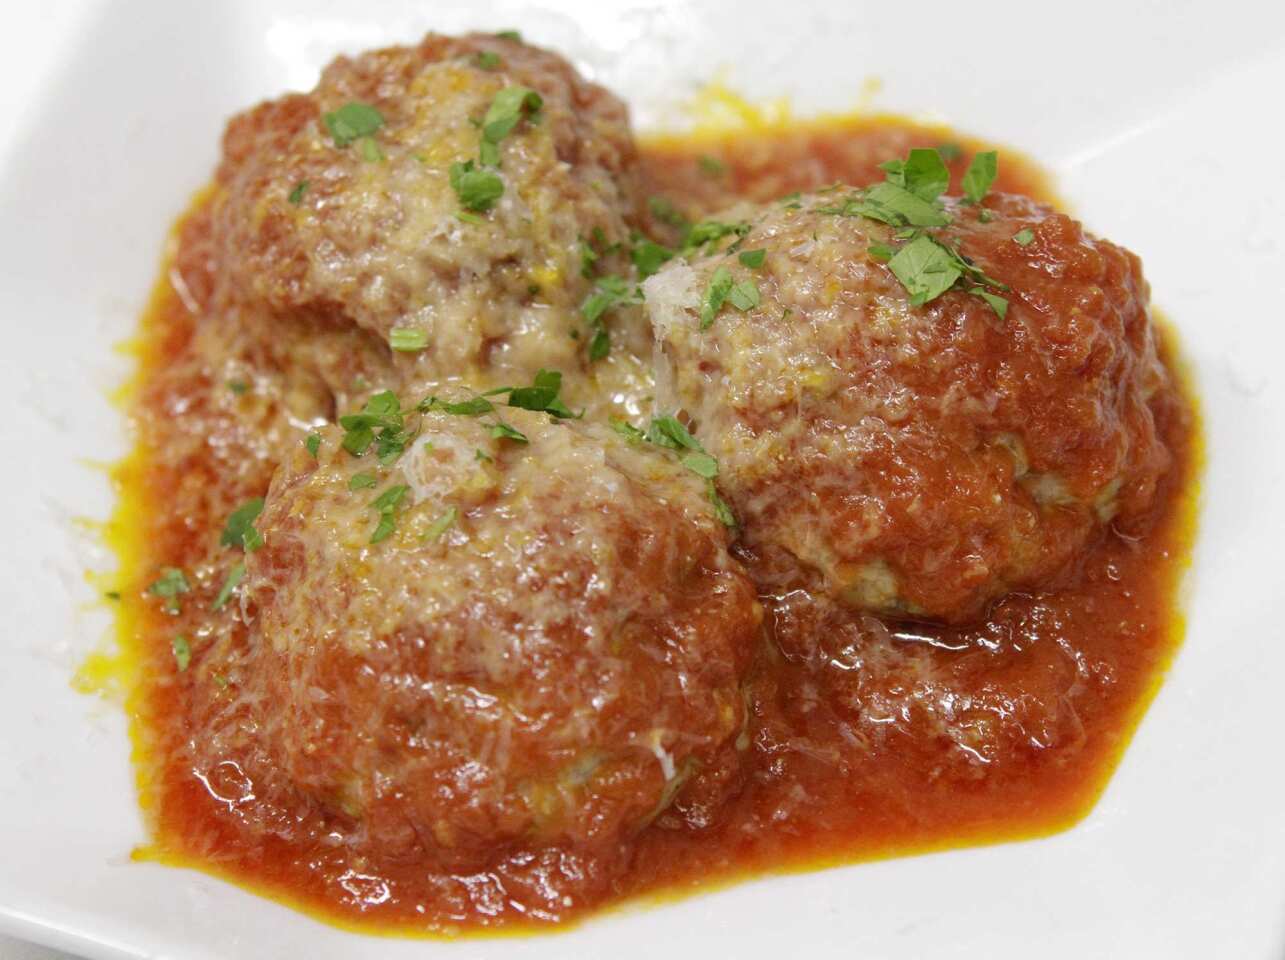 Meatballs in a pomodoro sauce is a good option for starters.